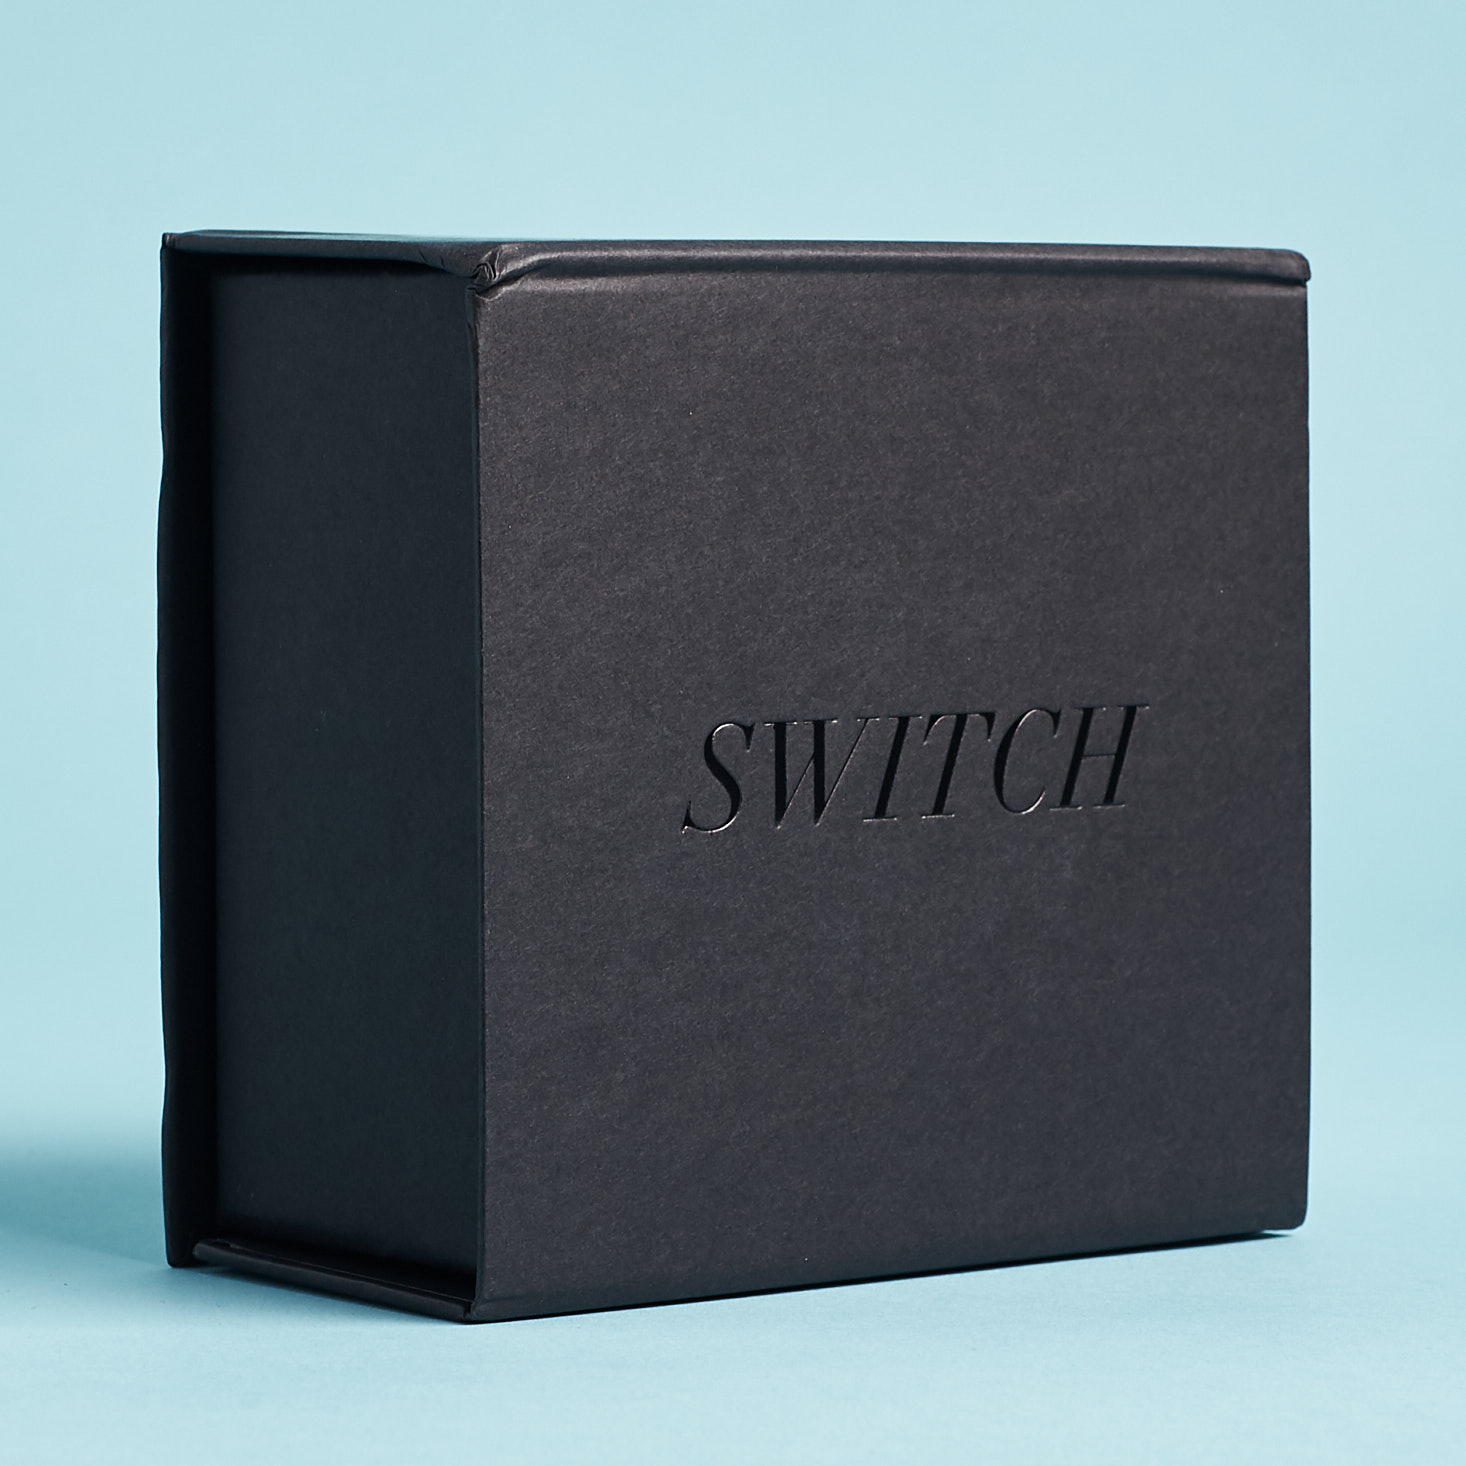 Switch Designer Jewelry Rental Review + 50% Off Coupon – December 2019